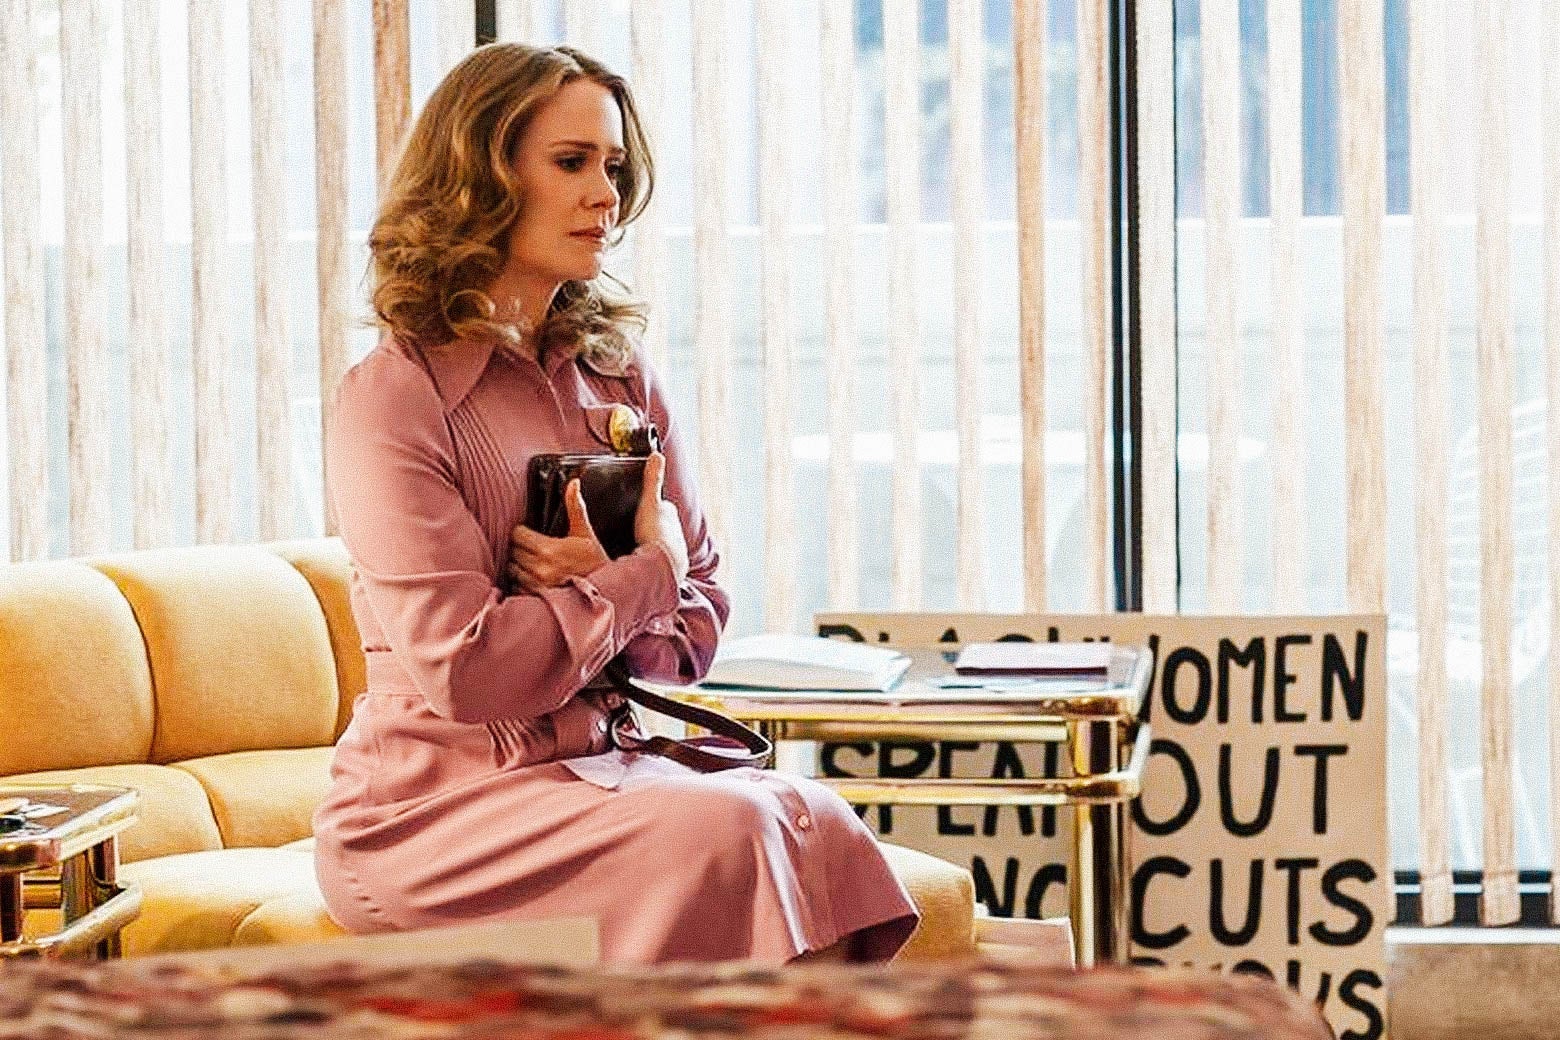 Sarah Paulson as Alice sitting on a sofa, clutching a book to her chest, looking conflicted.